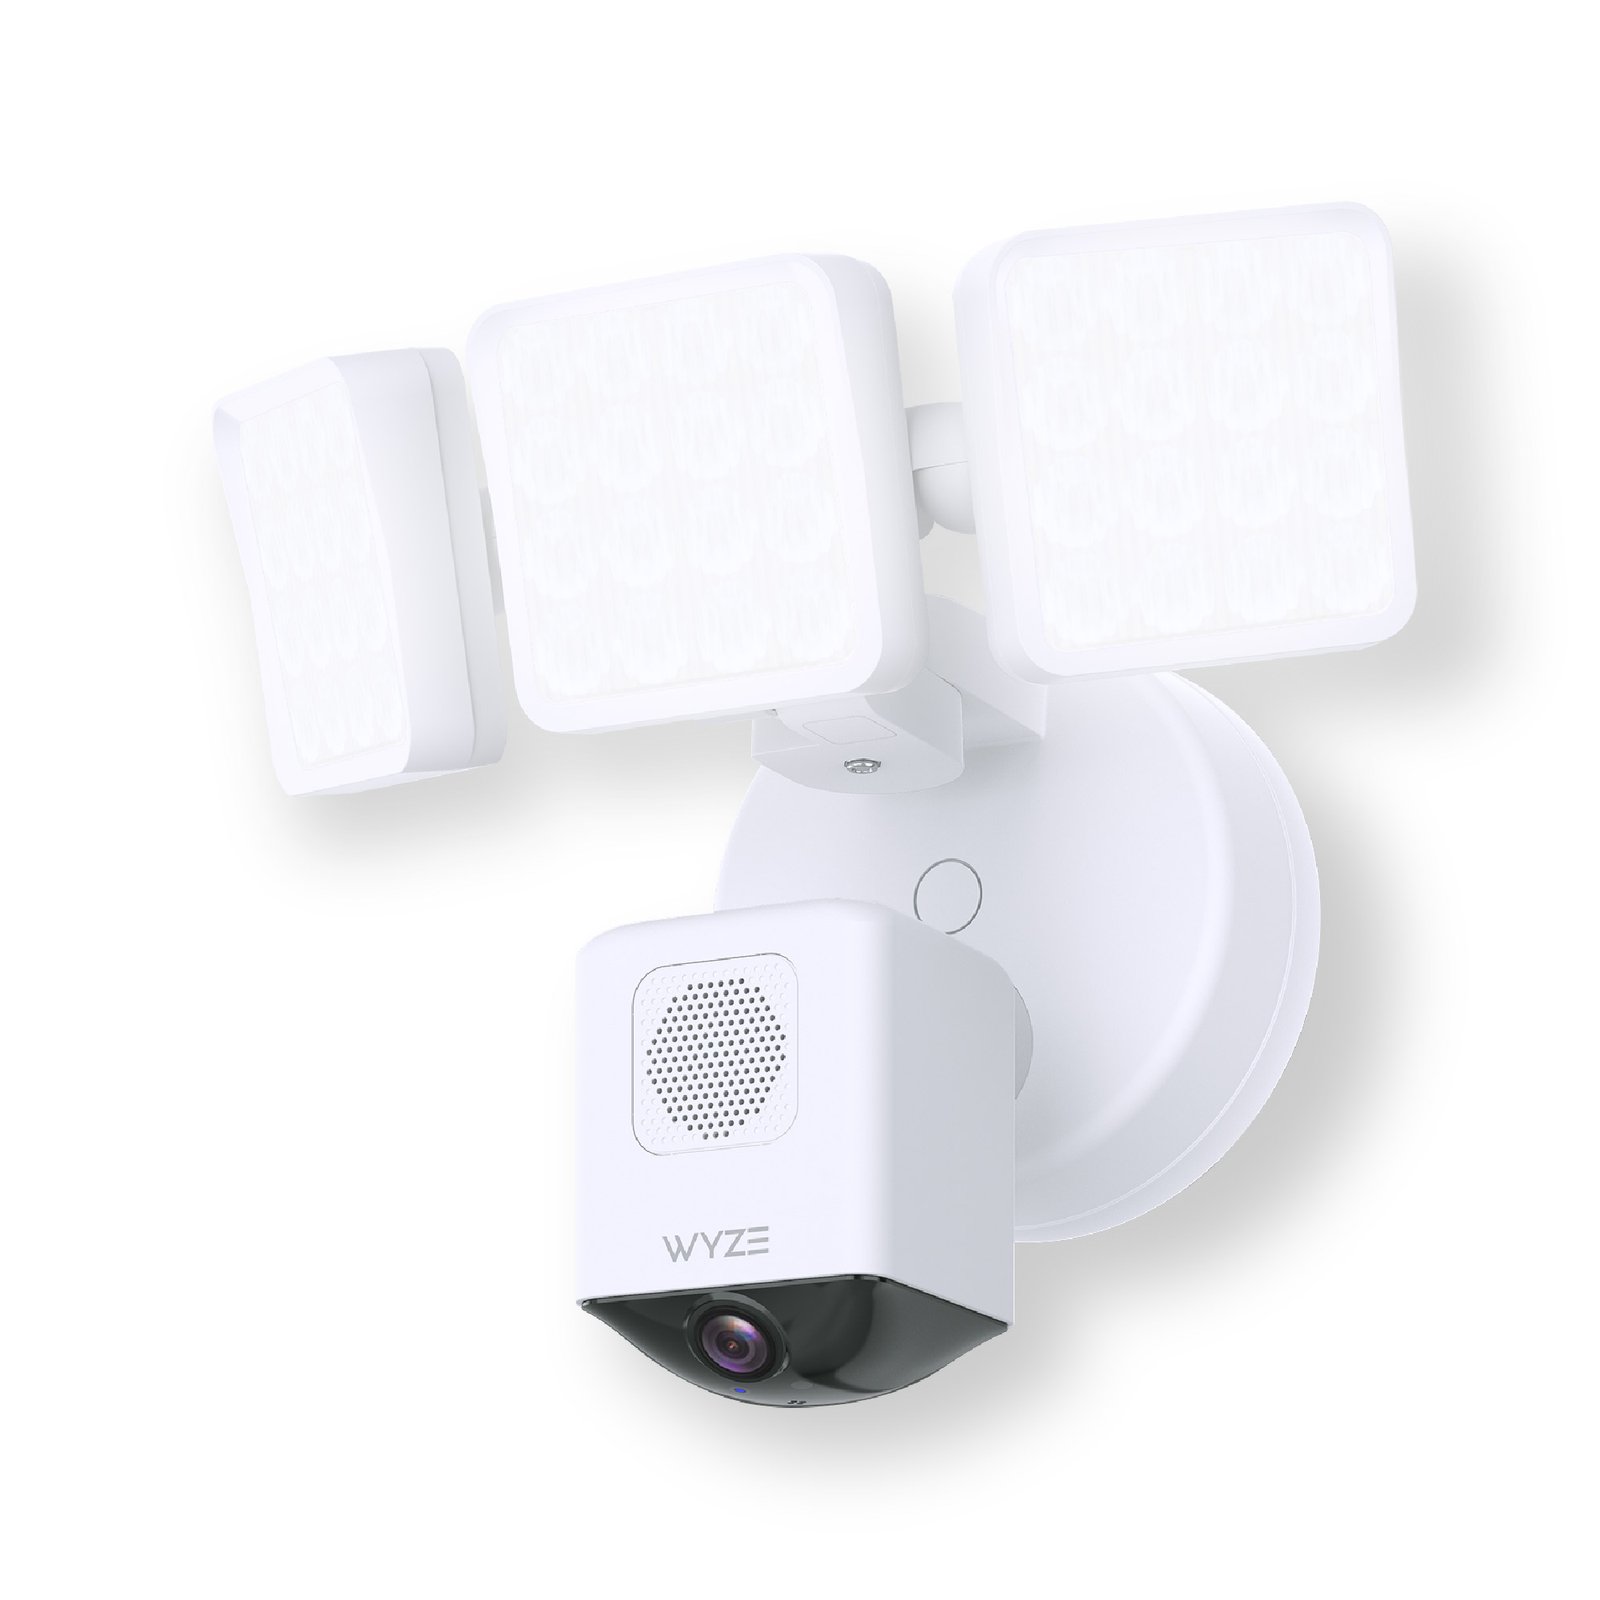 Review of the WYZE Cam Floodlight Pro